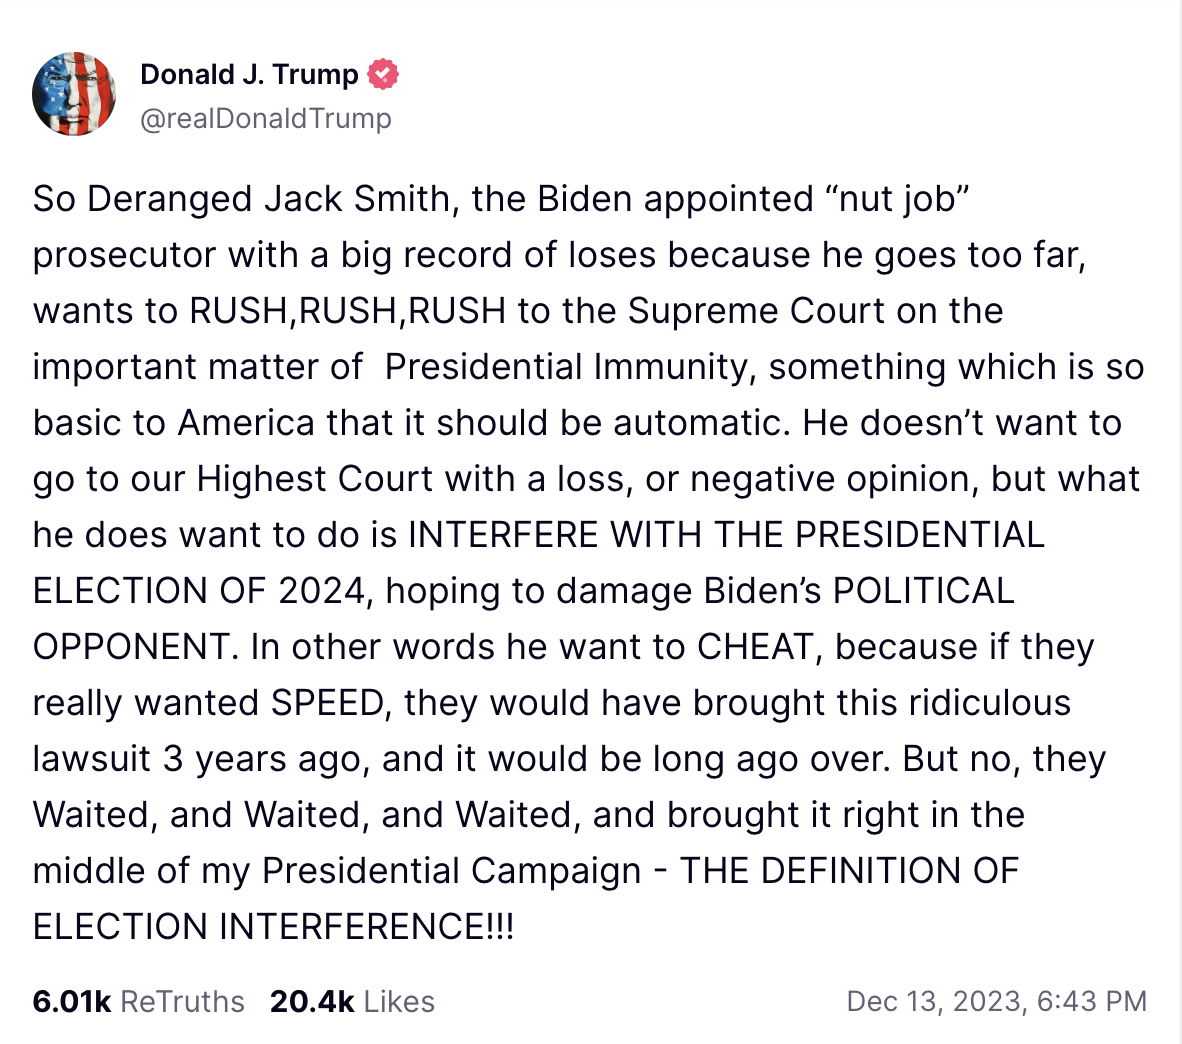 So Deranged Jack Smith, the Biden appointed “nut job” prosecutor with a big record of loses because he goes too far, wants to RUSH,RUSH,RUSH to the Supreme Court on the important matter of Presidential Immunity, something which is so basic to America that it should be automatic. He doesn’t want to go to our Highest Court with a loss, or negative opinion, but what he does want to do is INTERFERE WITH THE PRESIDENTIAL ELECTION OF 2024, hoping to damage Biden’s POLITICAL OPPONENT. In other words he want to CHEAT, because if they really wanted SPEED, they would have brought this ridiculous lawsuit 3 years ago, and it would be long ago over. But no, they Waited, and Waited, and Waited, and brought it right in the middle of my Presidential Campaign - THE DEFINITION OF ELECTION INTERFERENCE!!!